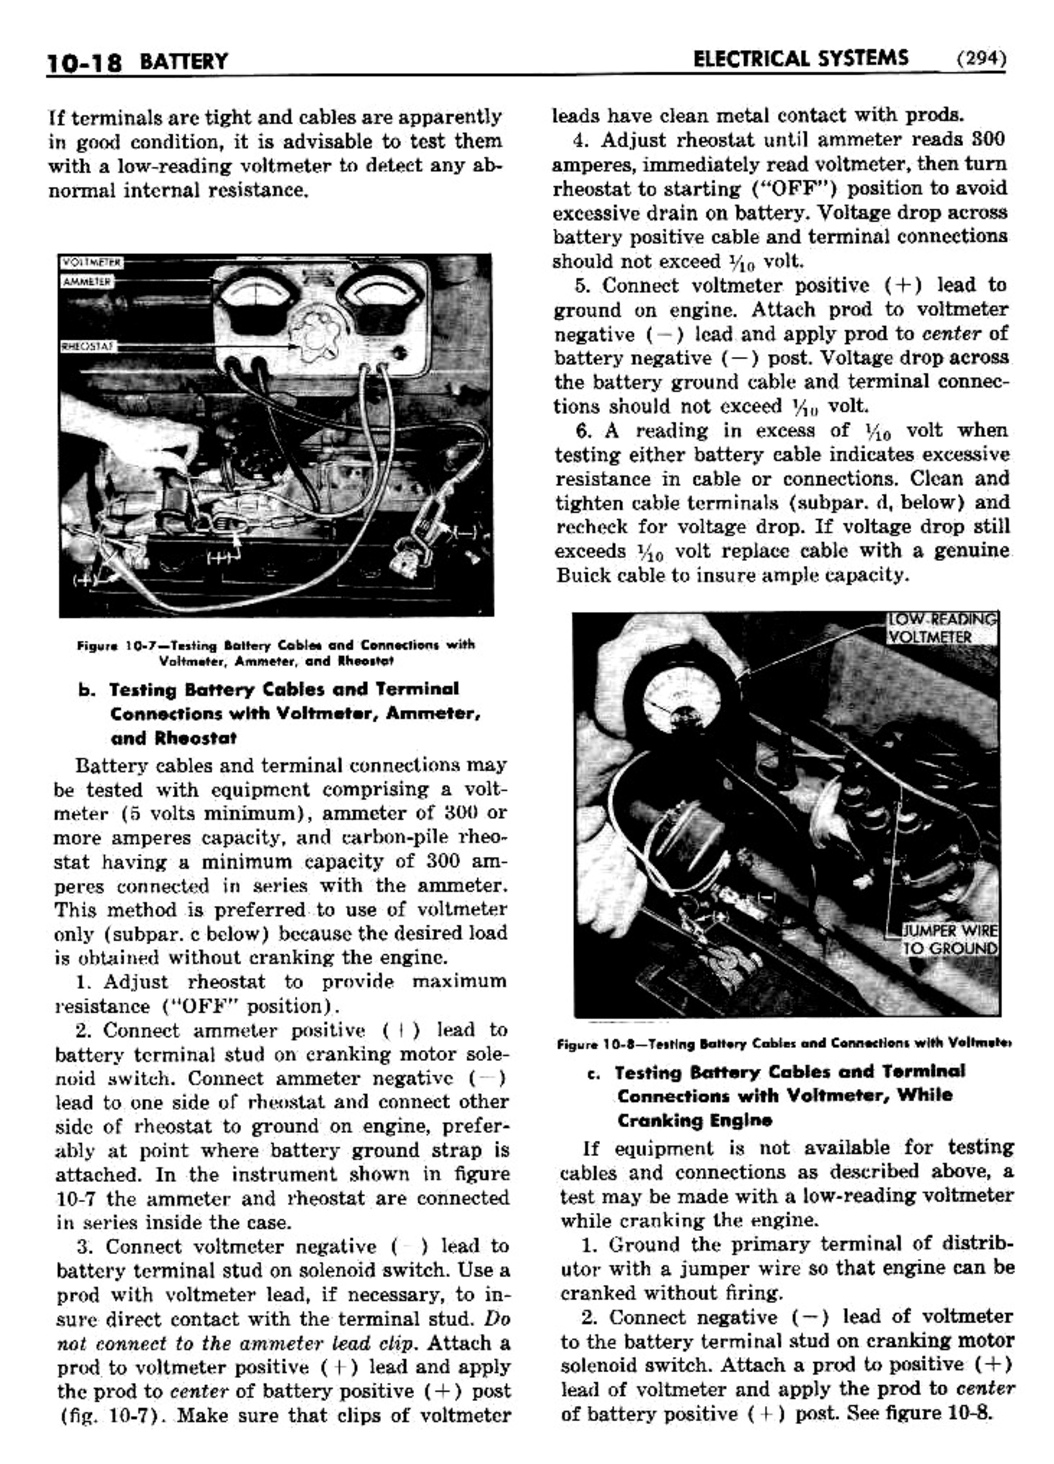 n_11 1948 Buick Shop Manual - Electrical Systems-018-018.jpg